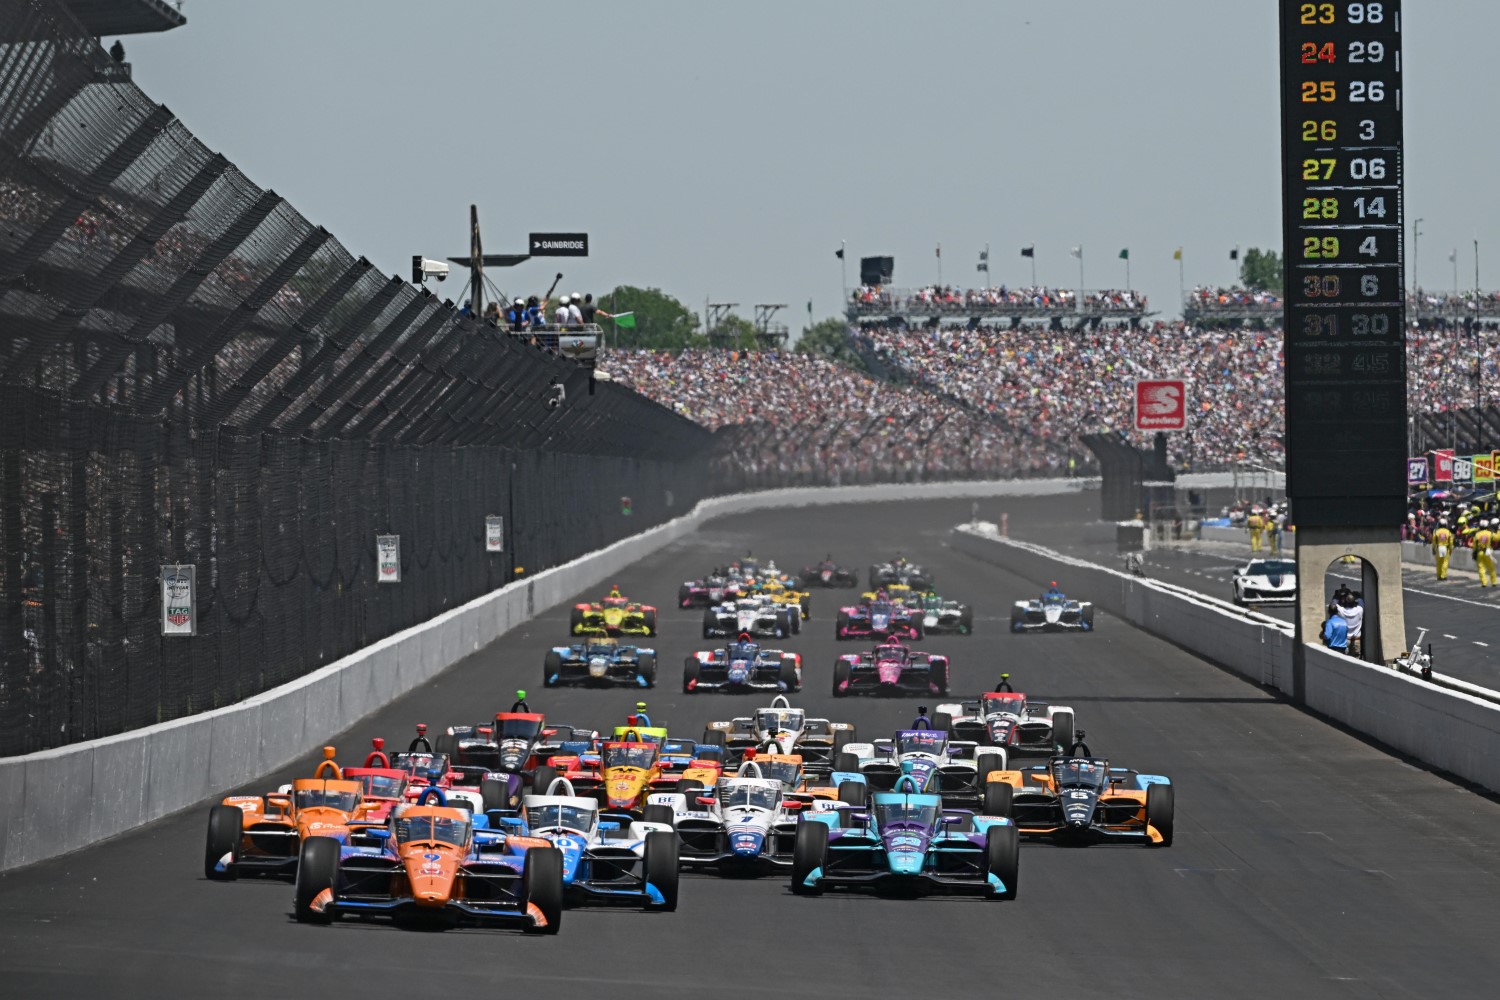 IndyCar: Indy 500 nears sellout